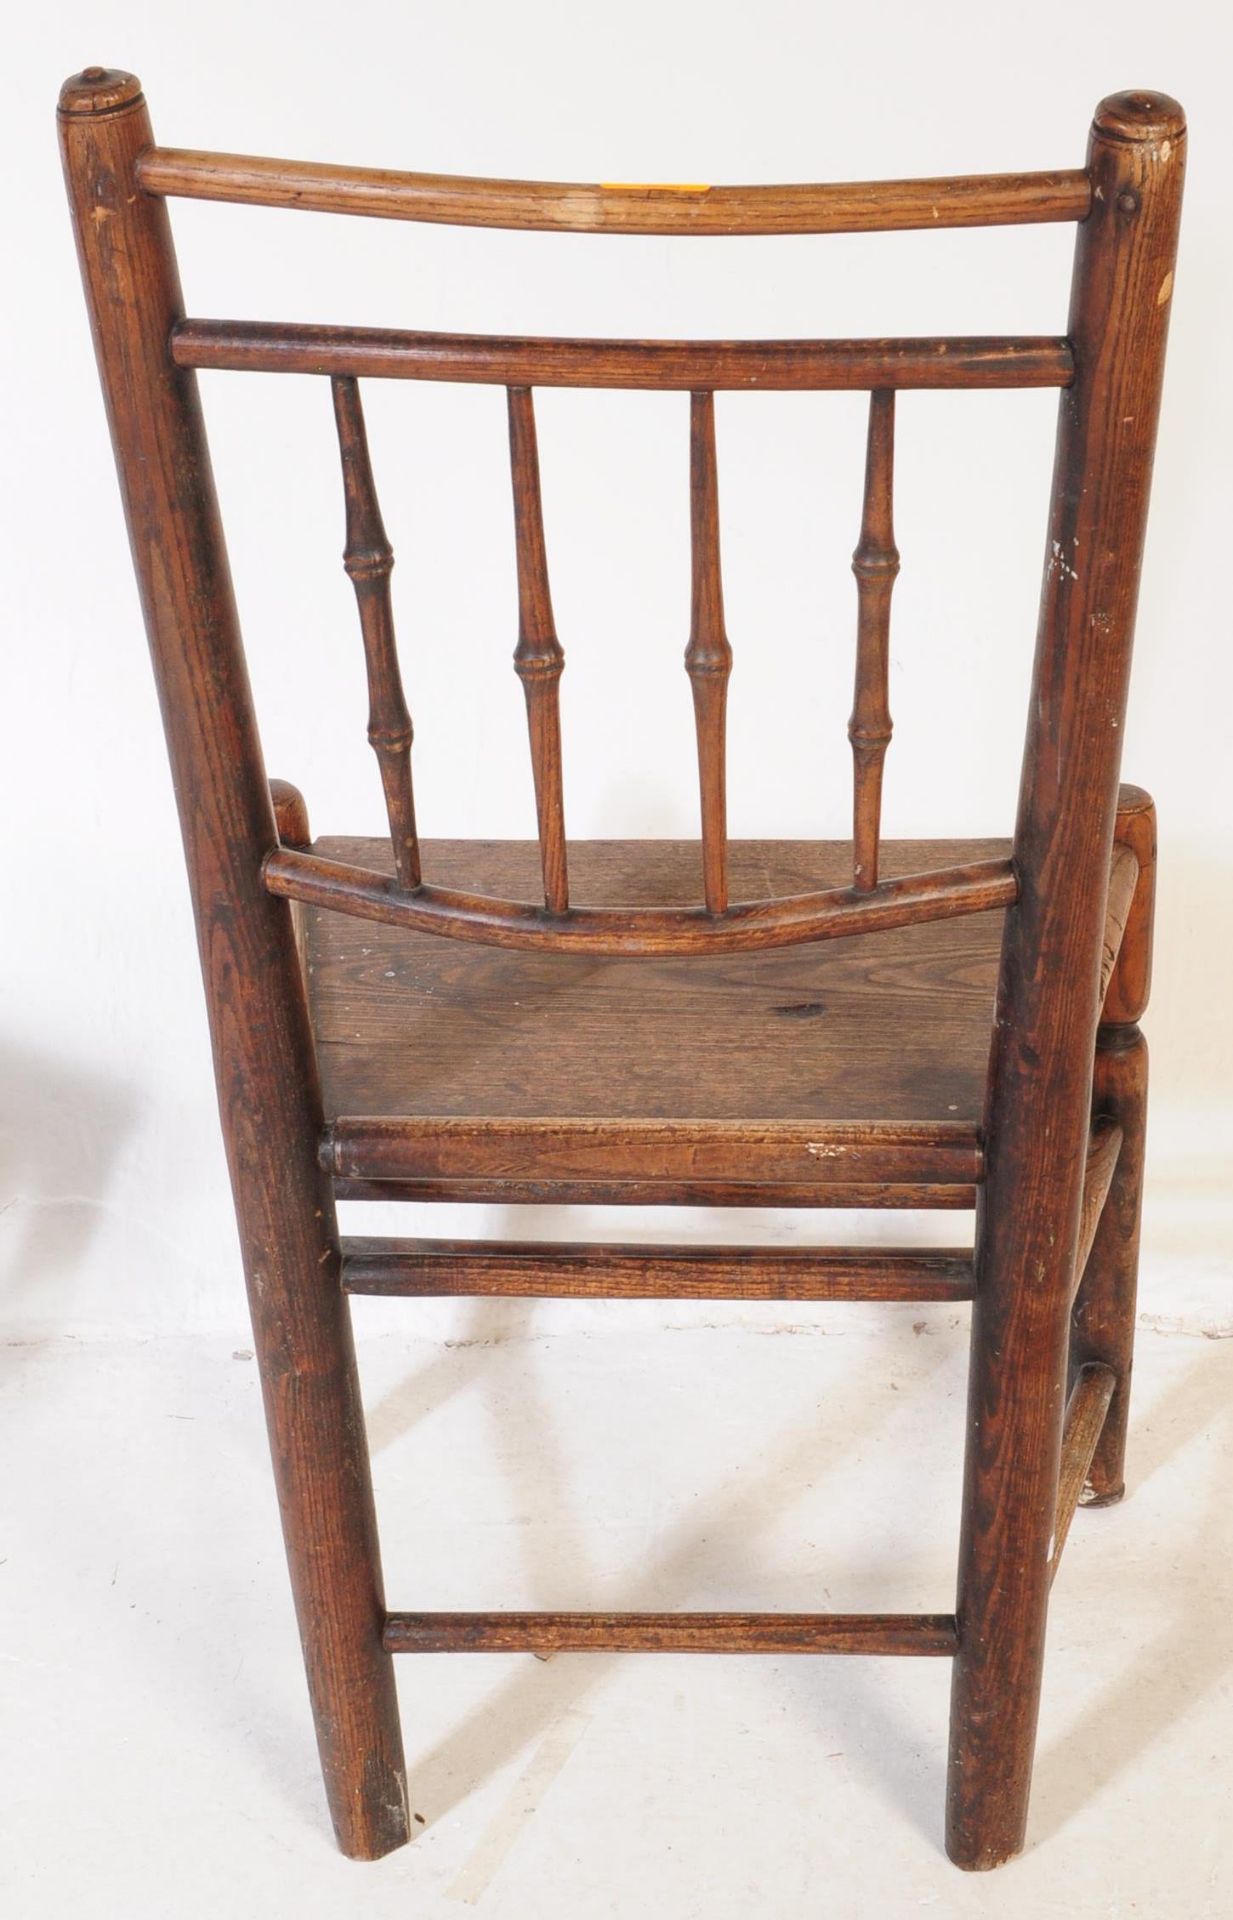 TWO 19TH CENTURY VICTORIAN CHAIRS - WILLIAM BIRCH MANNER - Image 4 of 8